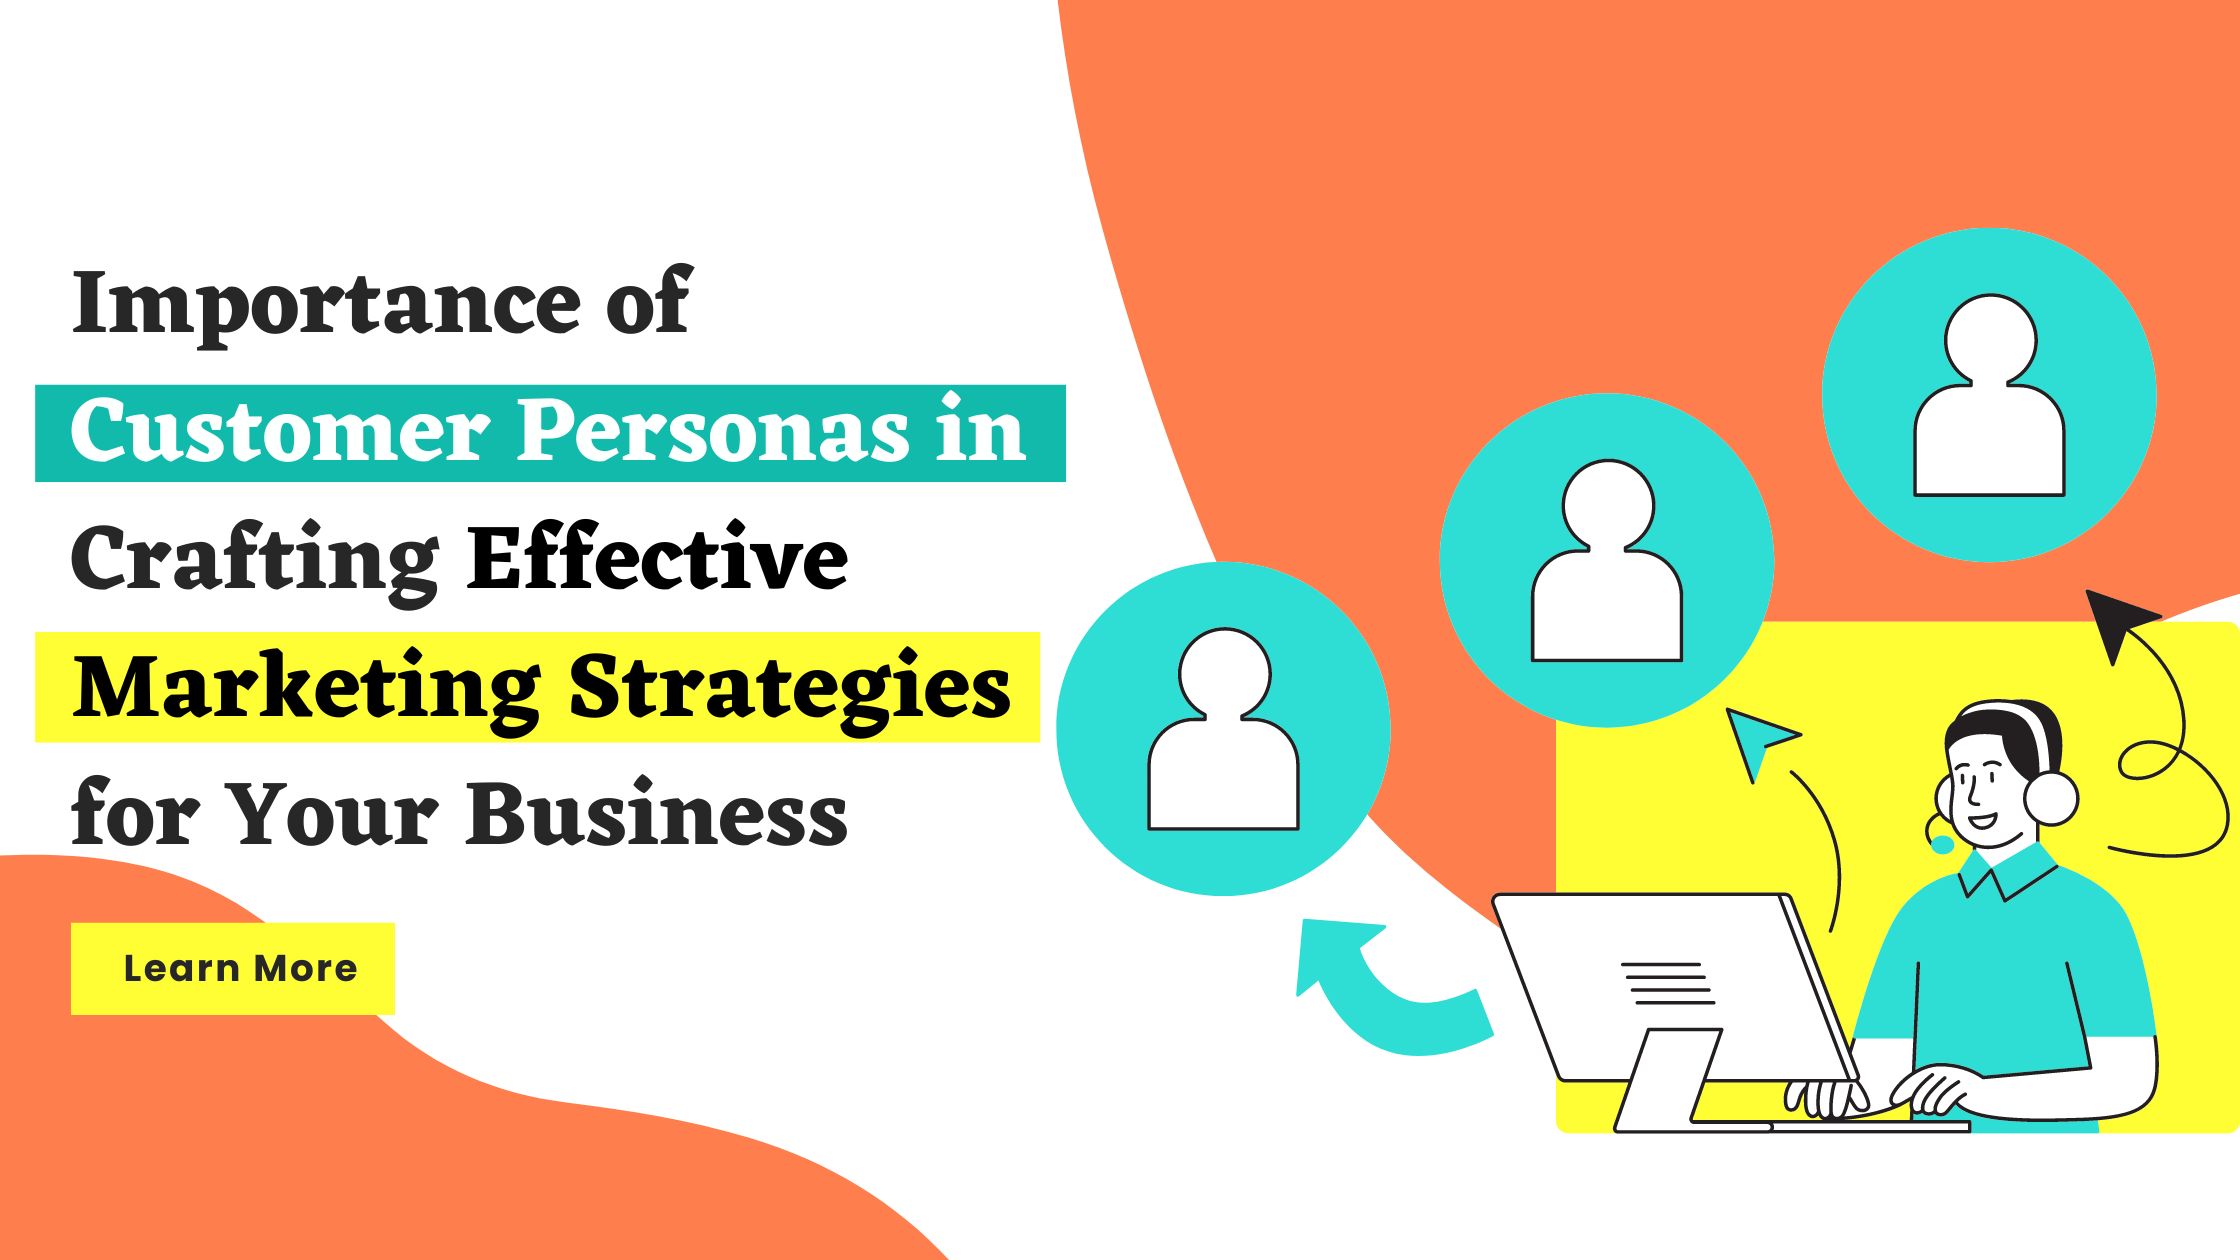 Importance of Customer Personas in Crafting Effective Marketing Strategies for Your Business by ritu negi